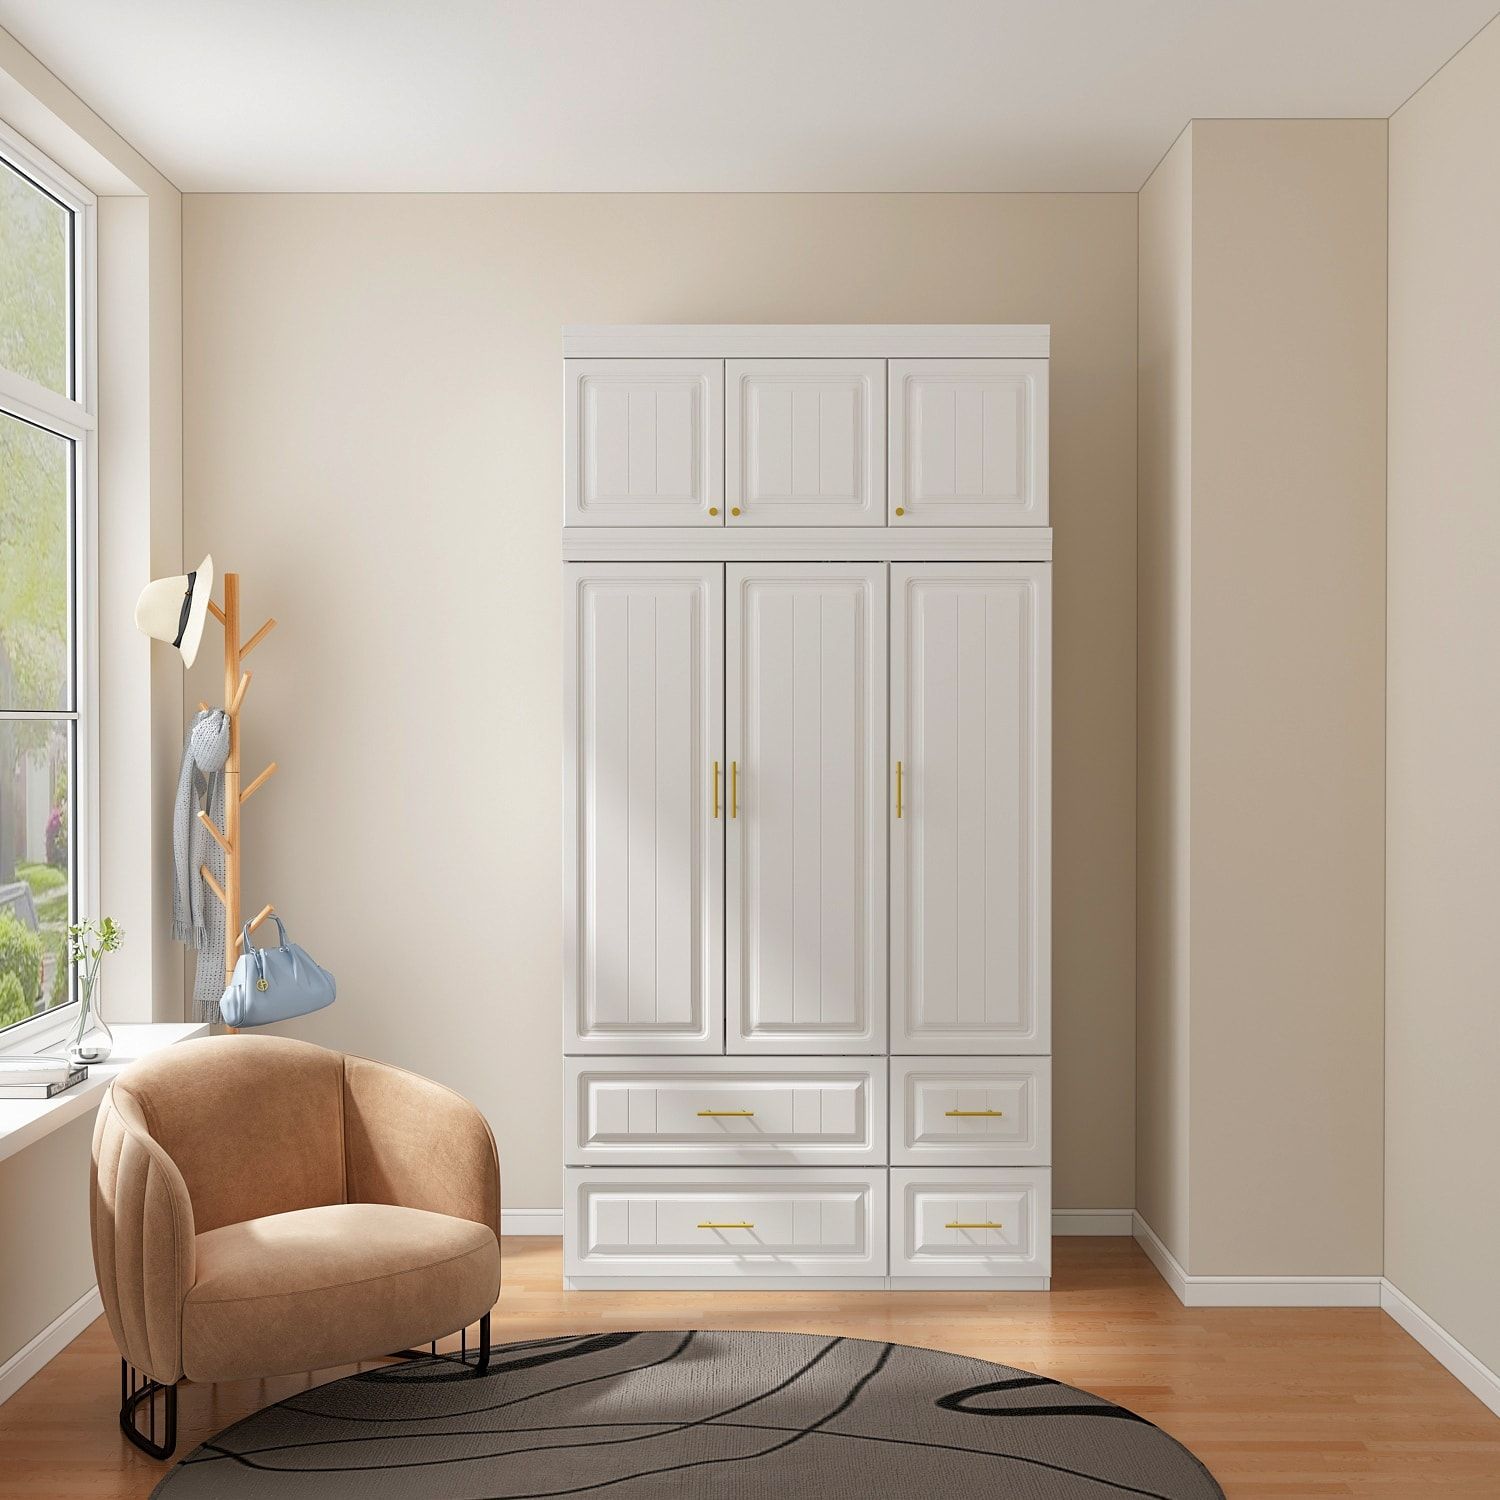 Modern Freestanding Wardrobe Armoire Closet Large Storage Cabinet – On Sale  – Bed Bath & Beyond – 37070497 With Regard To Large White Wardrobes With Drawers (View 14 of 15)